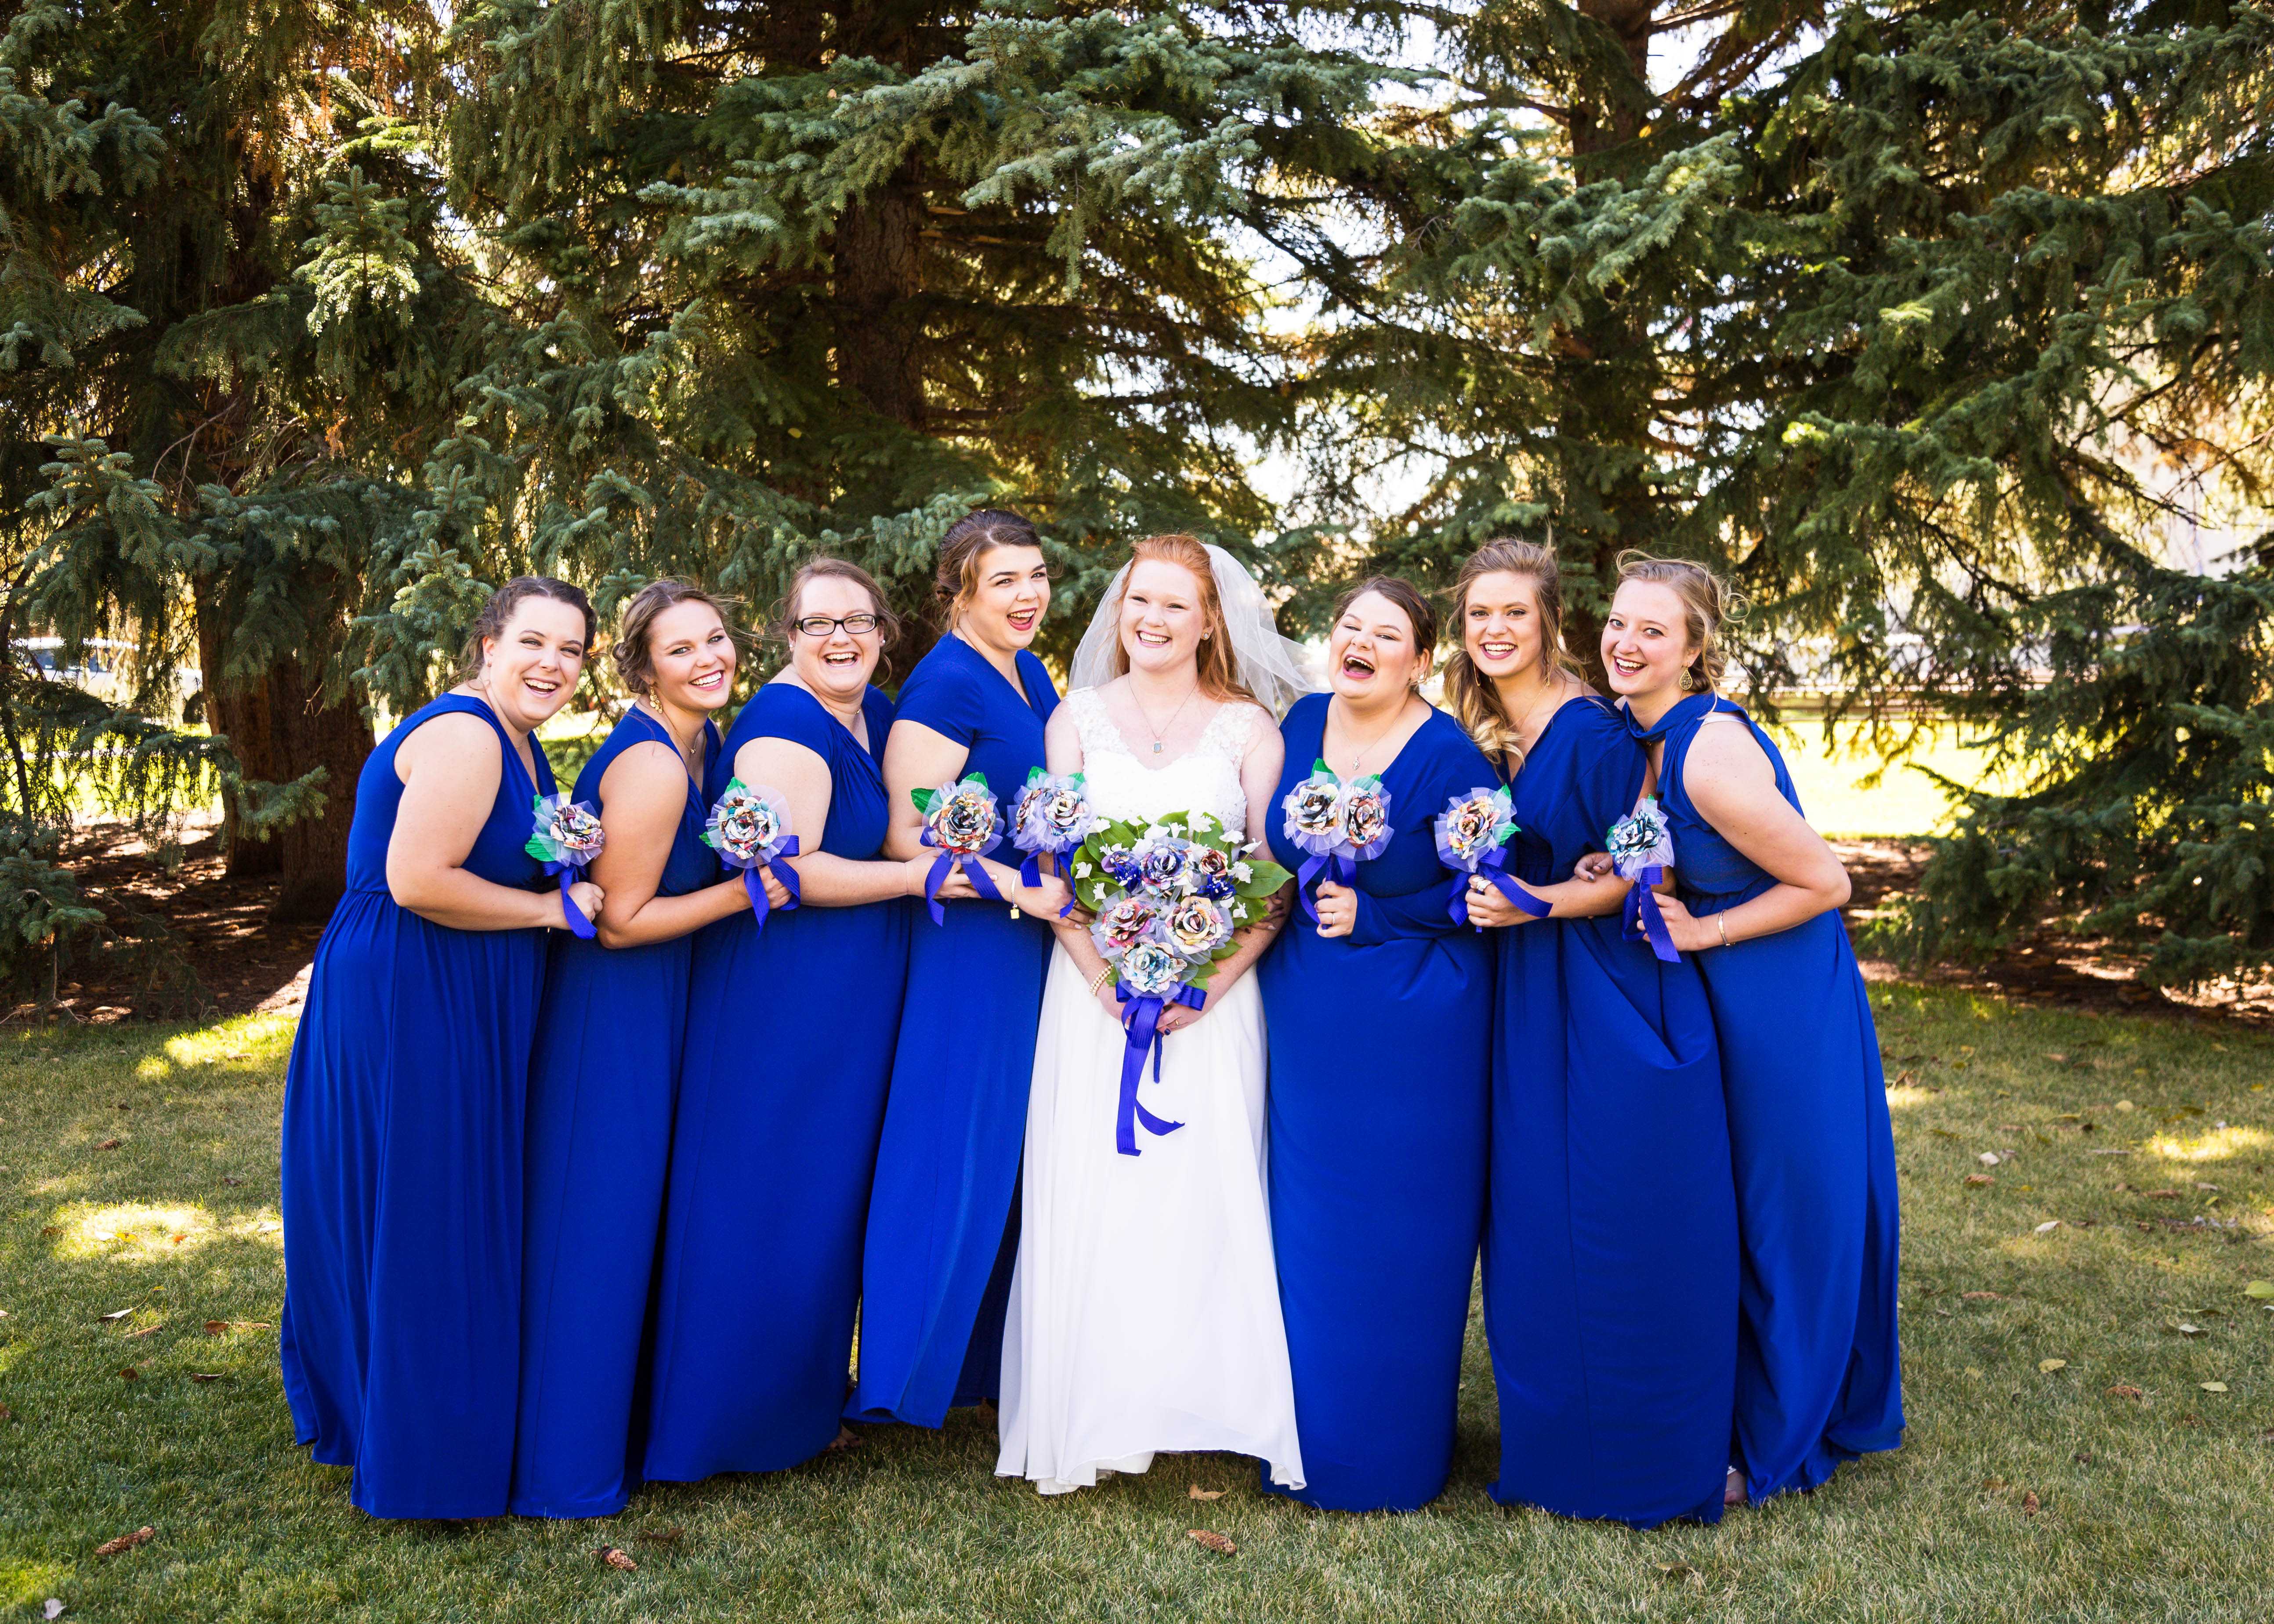 bride and bridesmaids laugh as they pose together